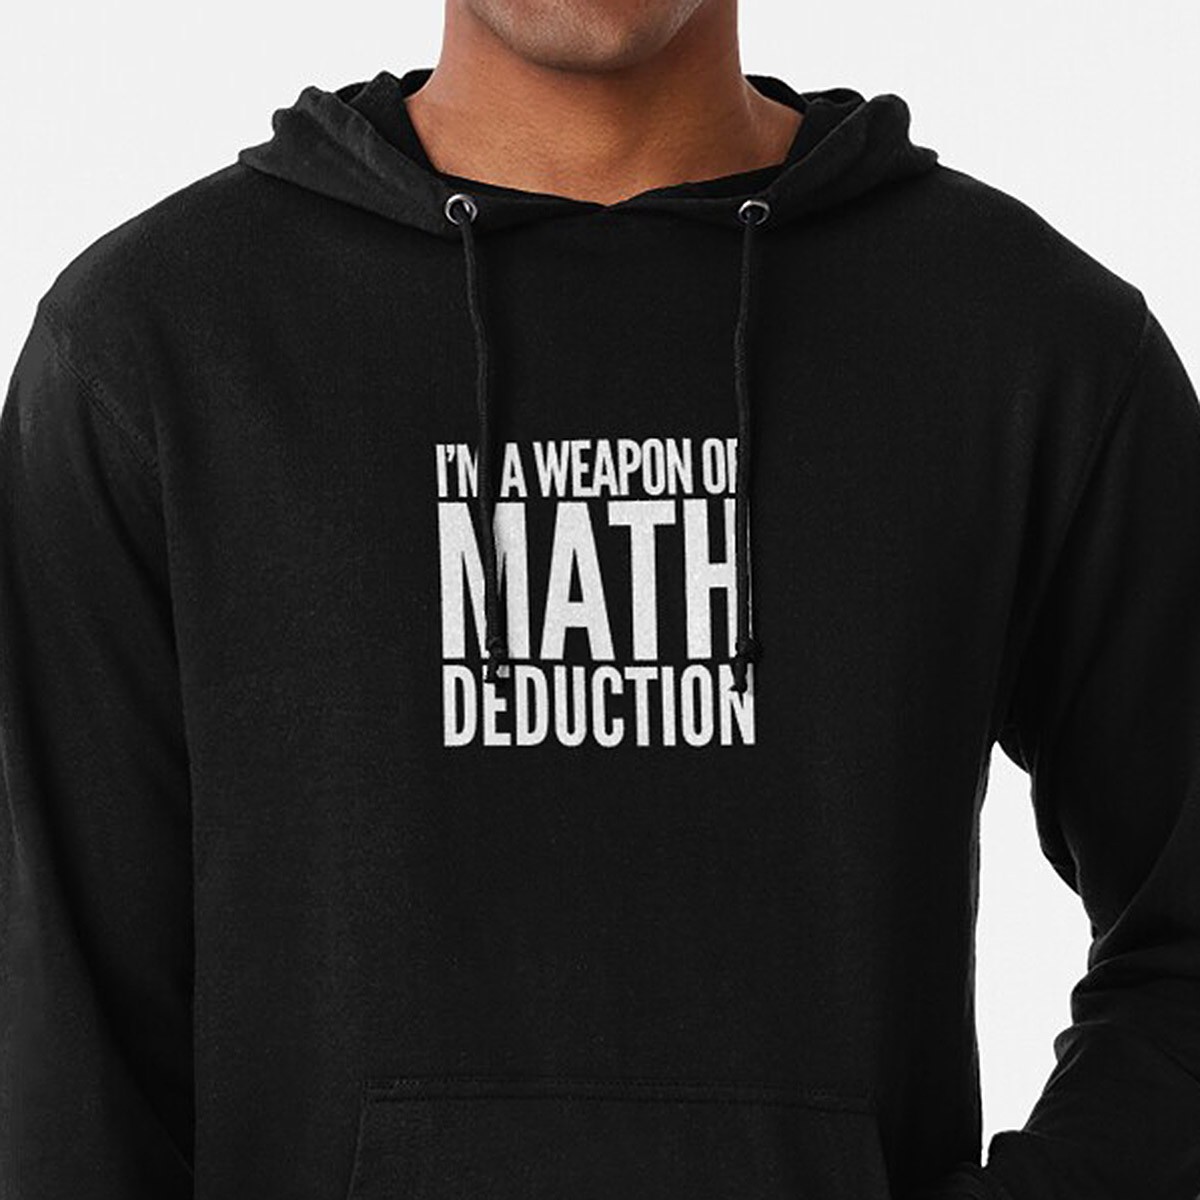 Weapon of Math Deduction Lightweight Hoodie by NTK Apparel